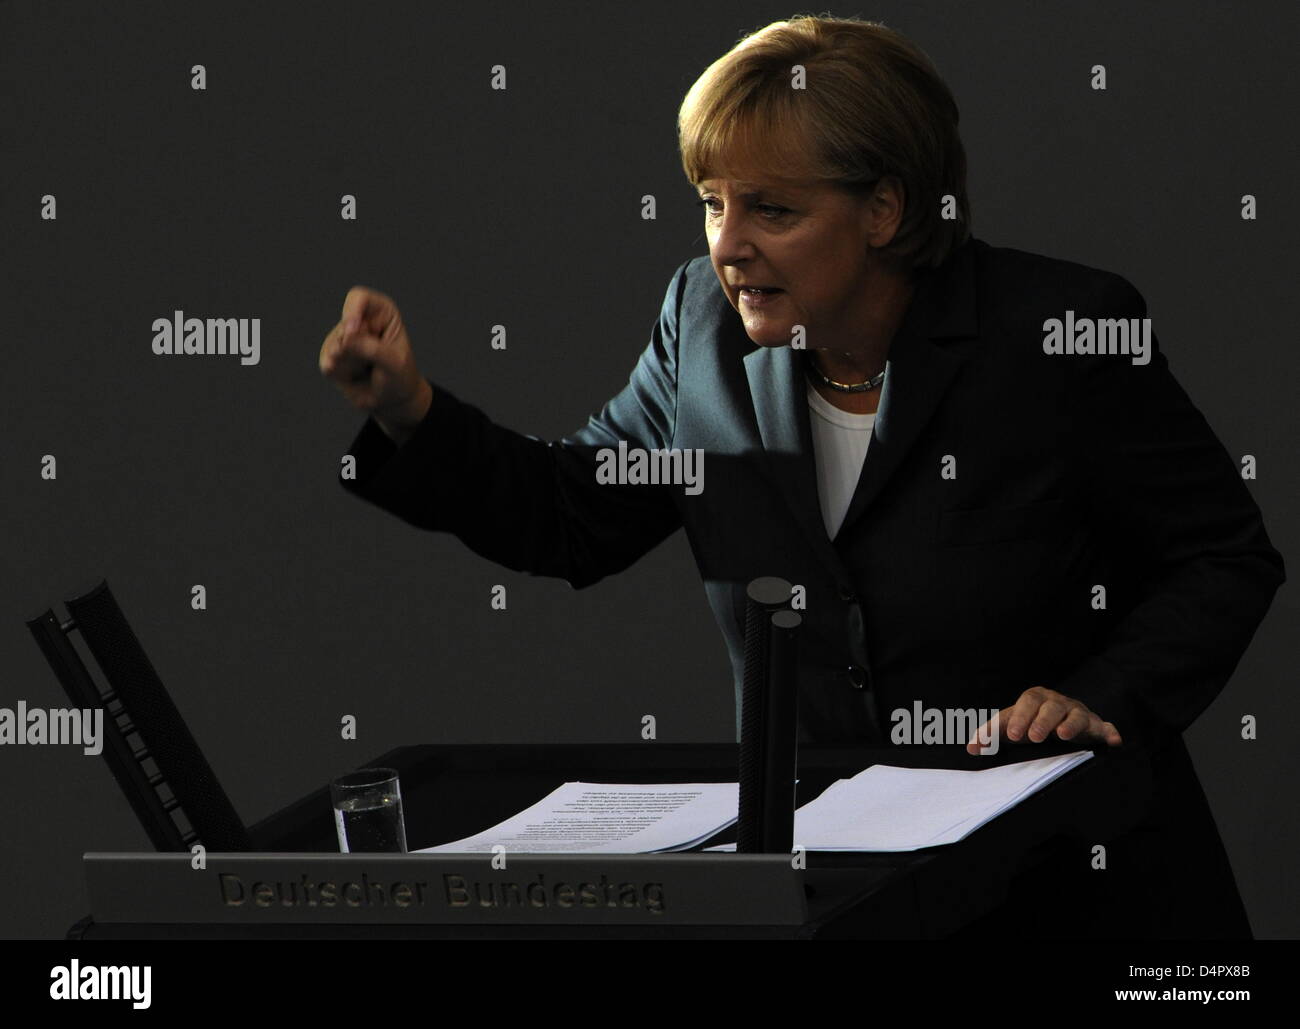 German Chancellor Angela Merkel adresses the German Bundestag on the state of the nation in a special session in Berlin, Germany, 08 September 2009. The special session?s agenda included also the topics of the Germany-ordered NATO airstrike in Afghanistan, passing the Lisbon Treaty comcomitant laws, the rehabilitaion of so-called ?war betrayers? and a debate on the state of the nat Stock Photo